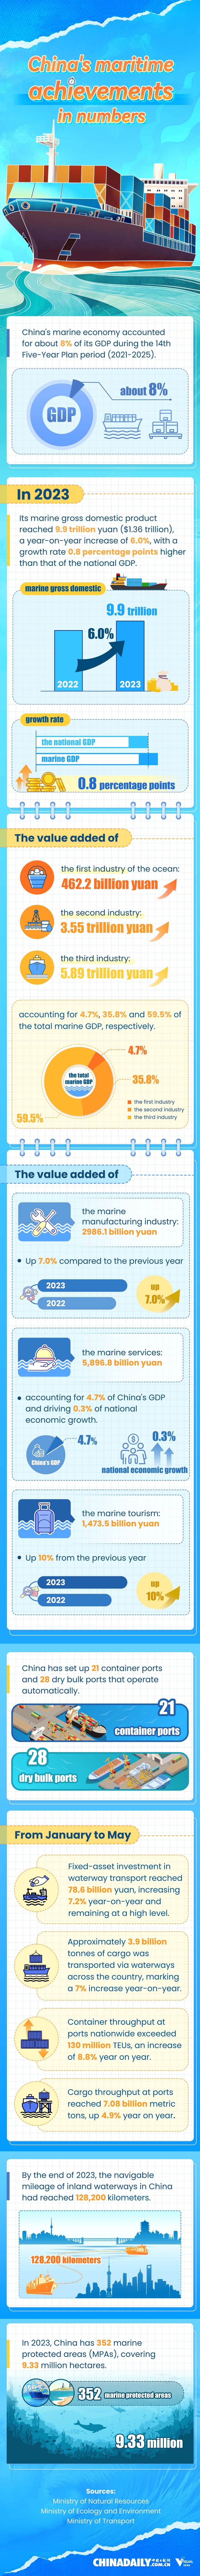 China's maritime achievements in numbers